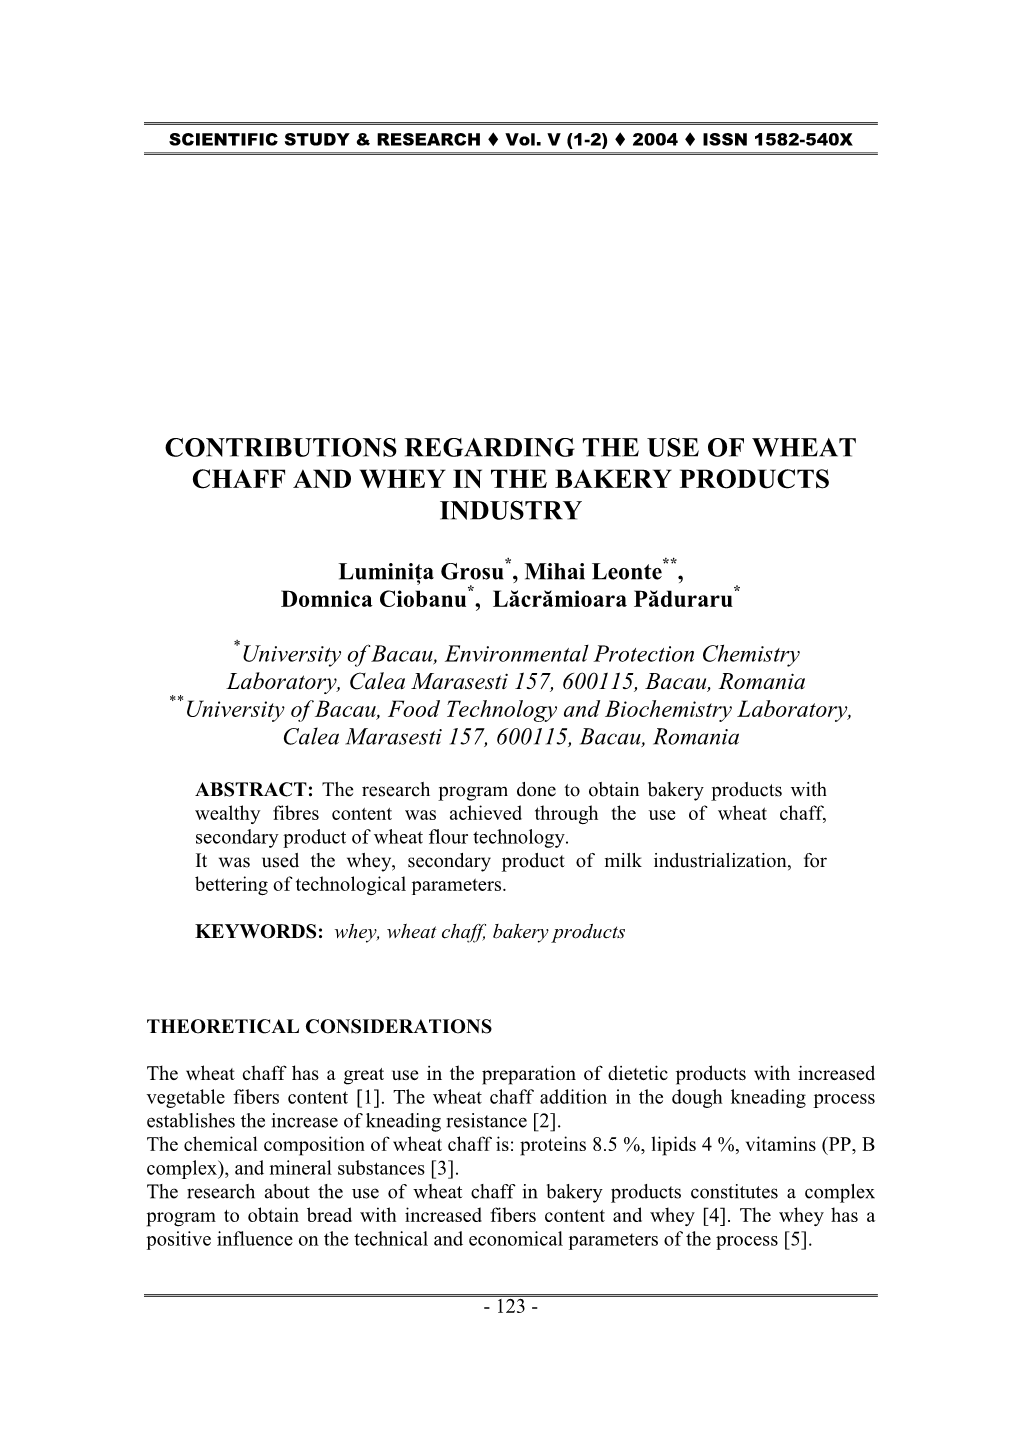 Contributions Regarding the Use of Wheat Chaff and Whey in the Bakery Products Industry